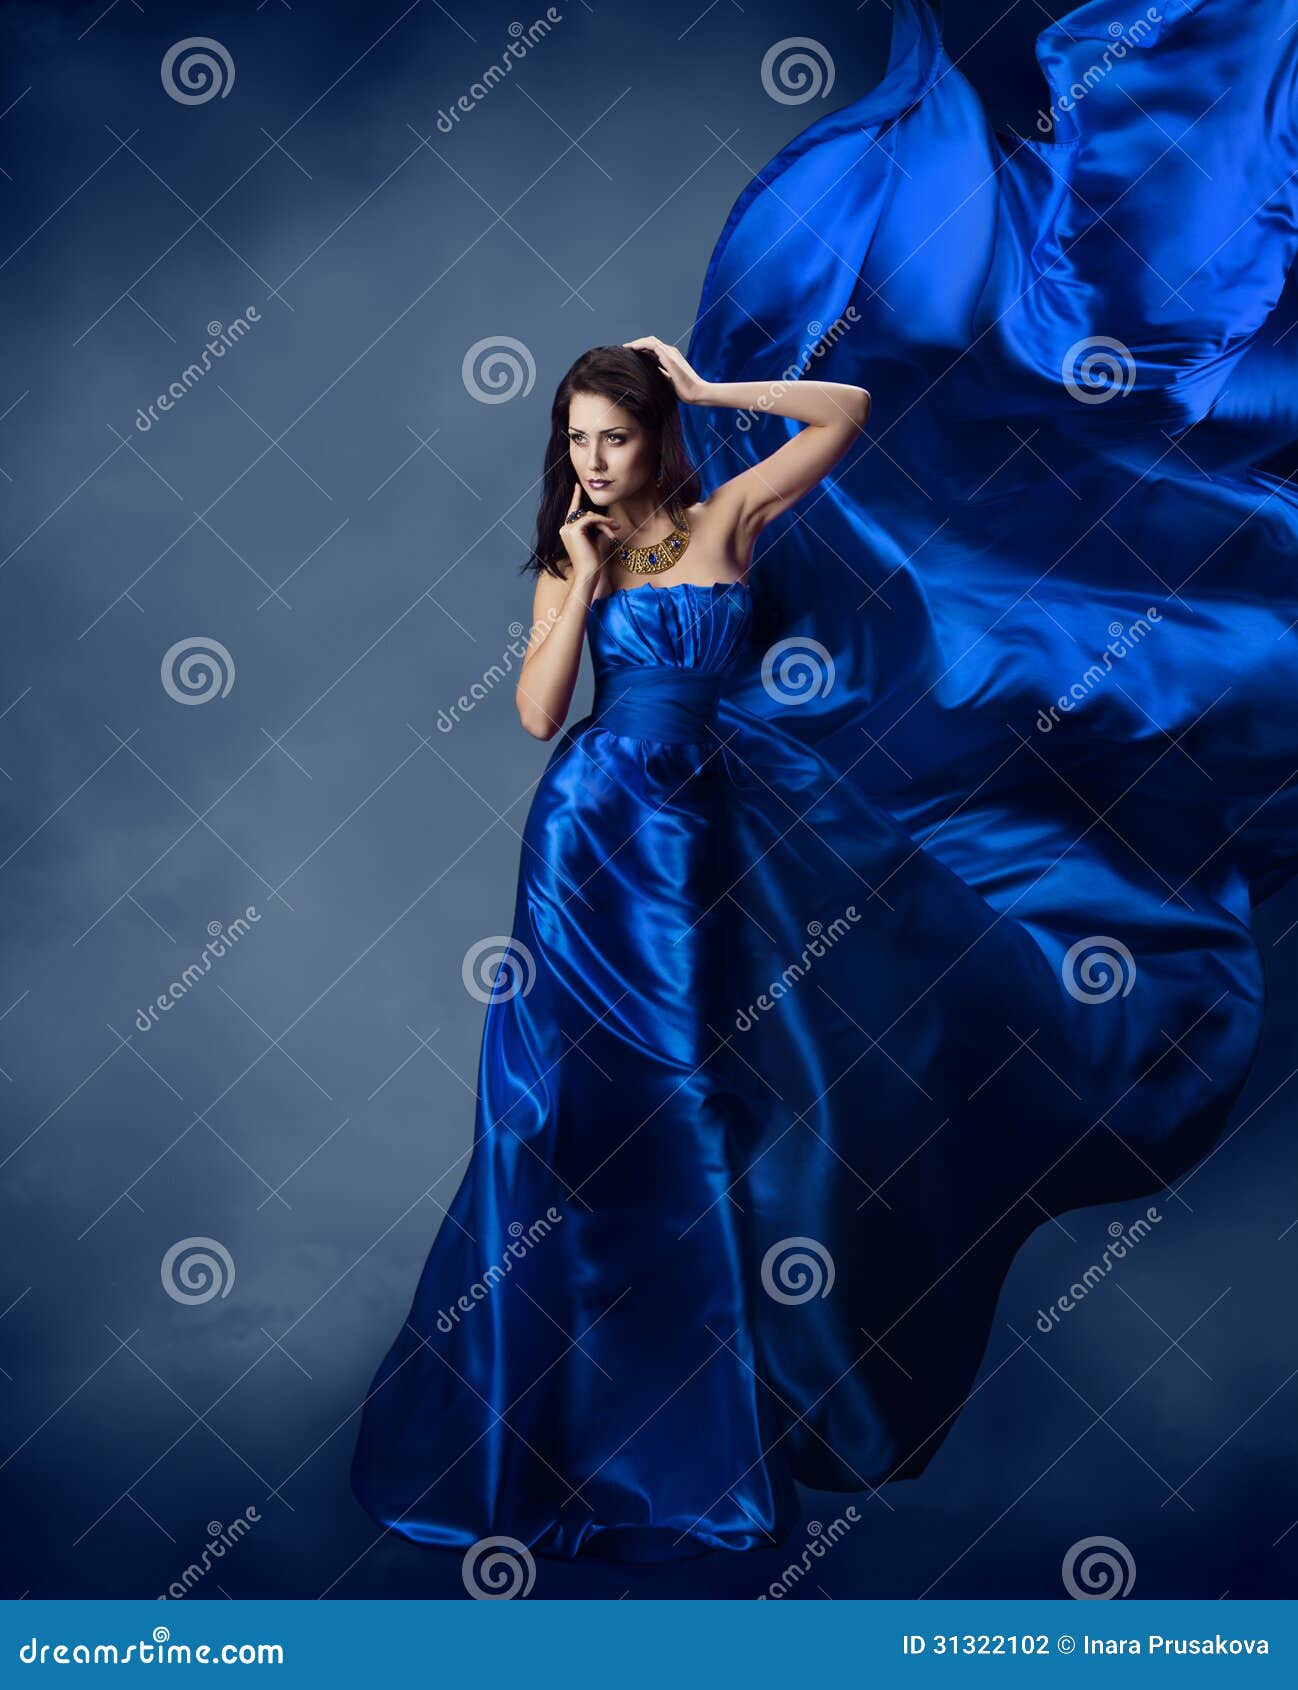 woman in blue dress with flying silk fabric